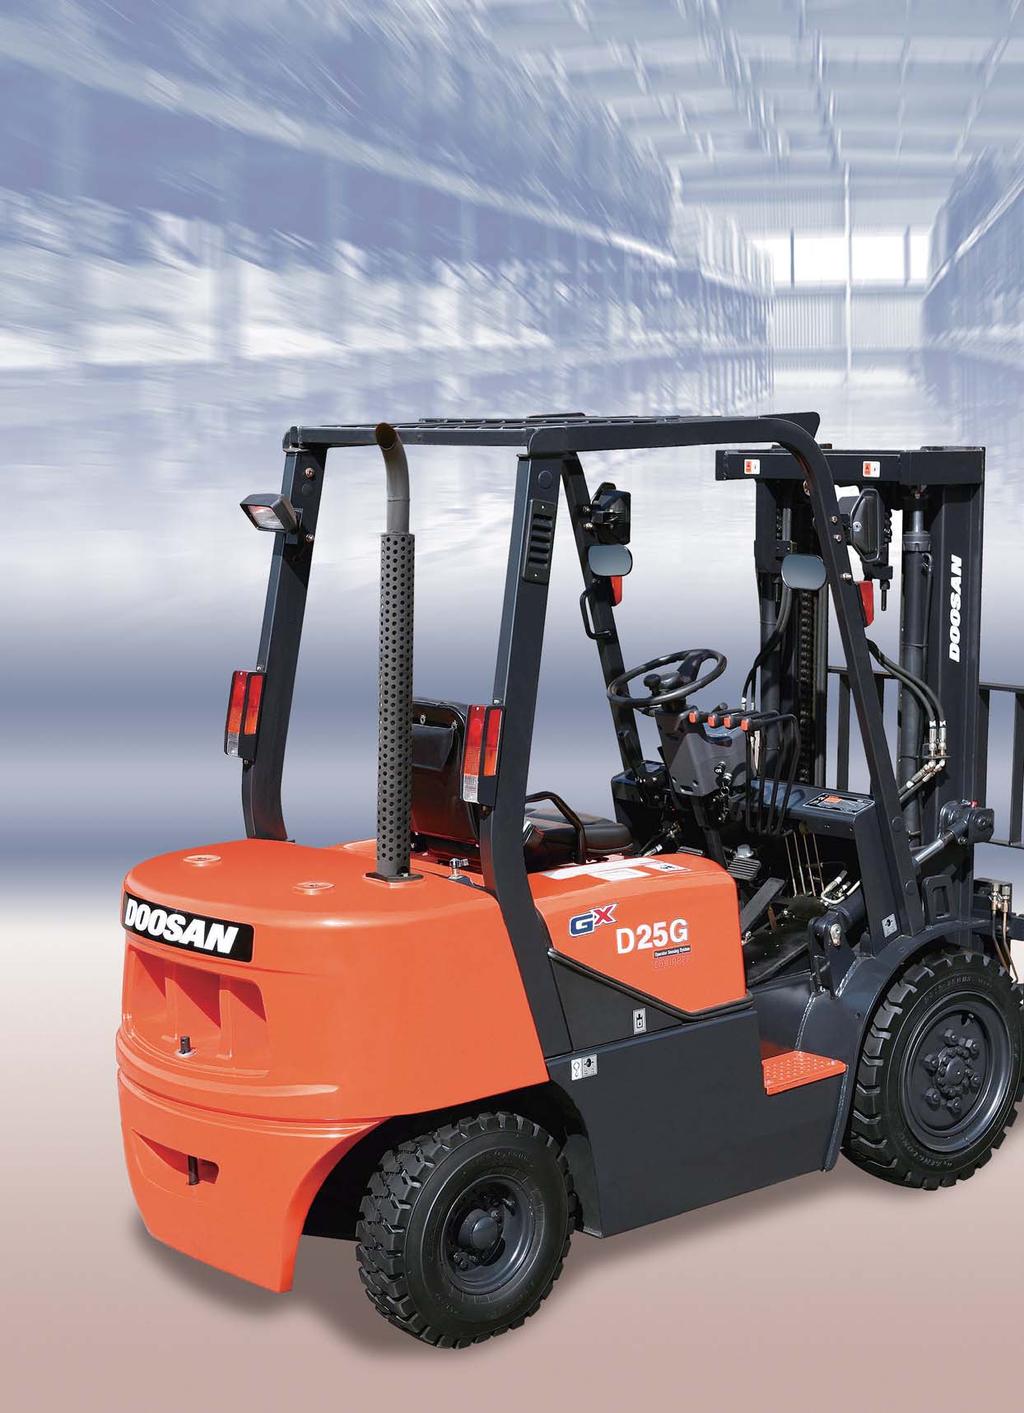 Manage your profits and performance with Doosan forklifts!